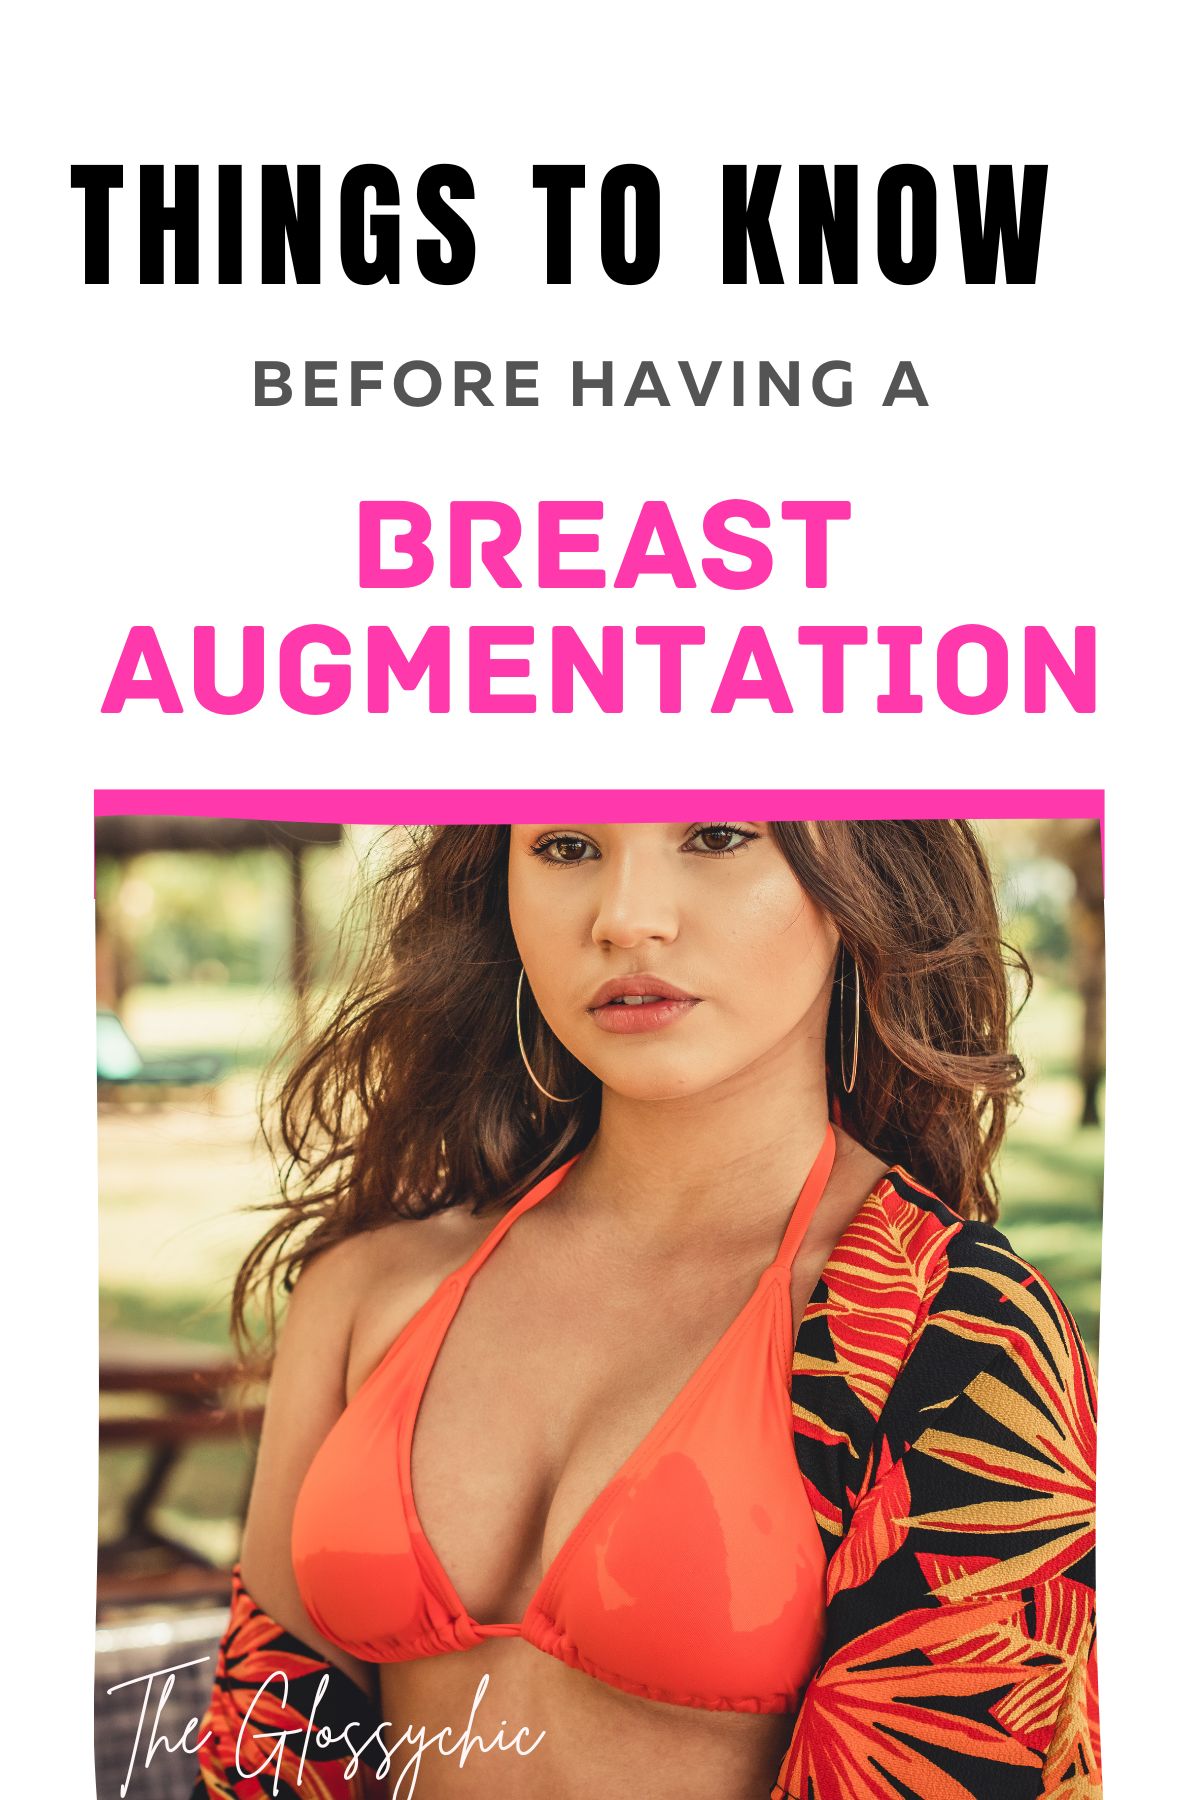 Things To Know Before Having A Breast Augmentation